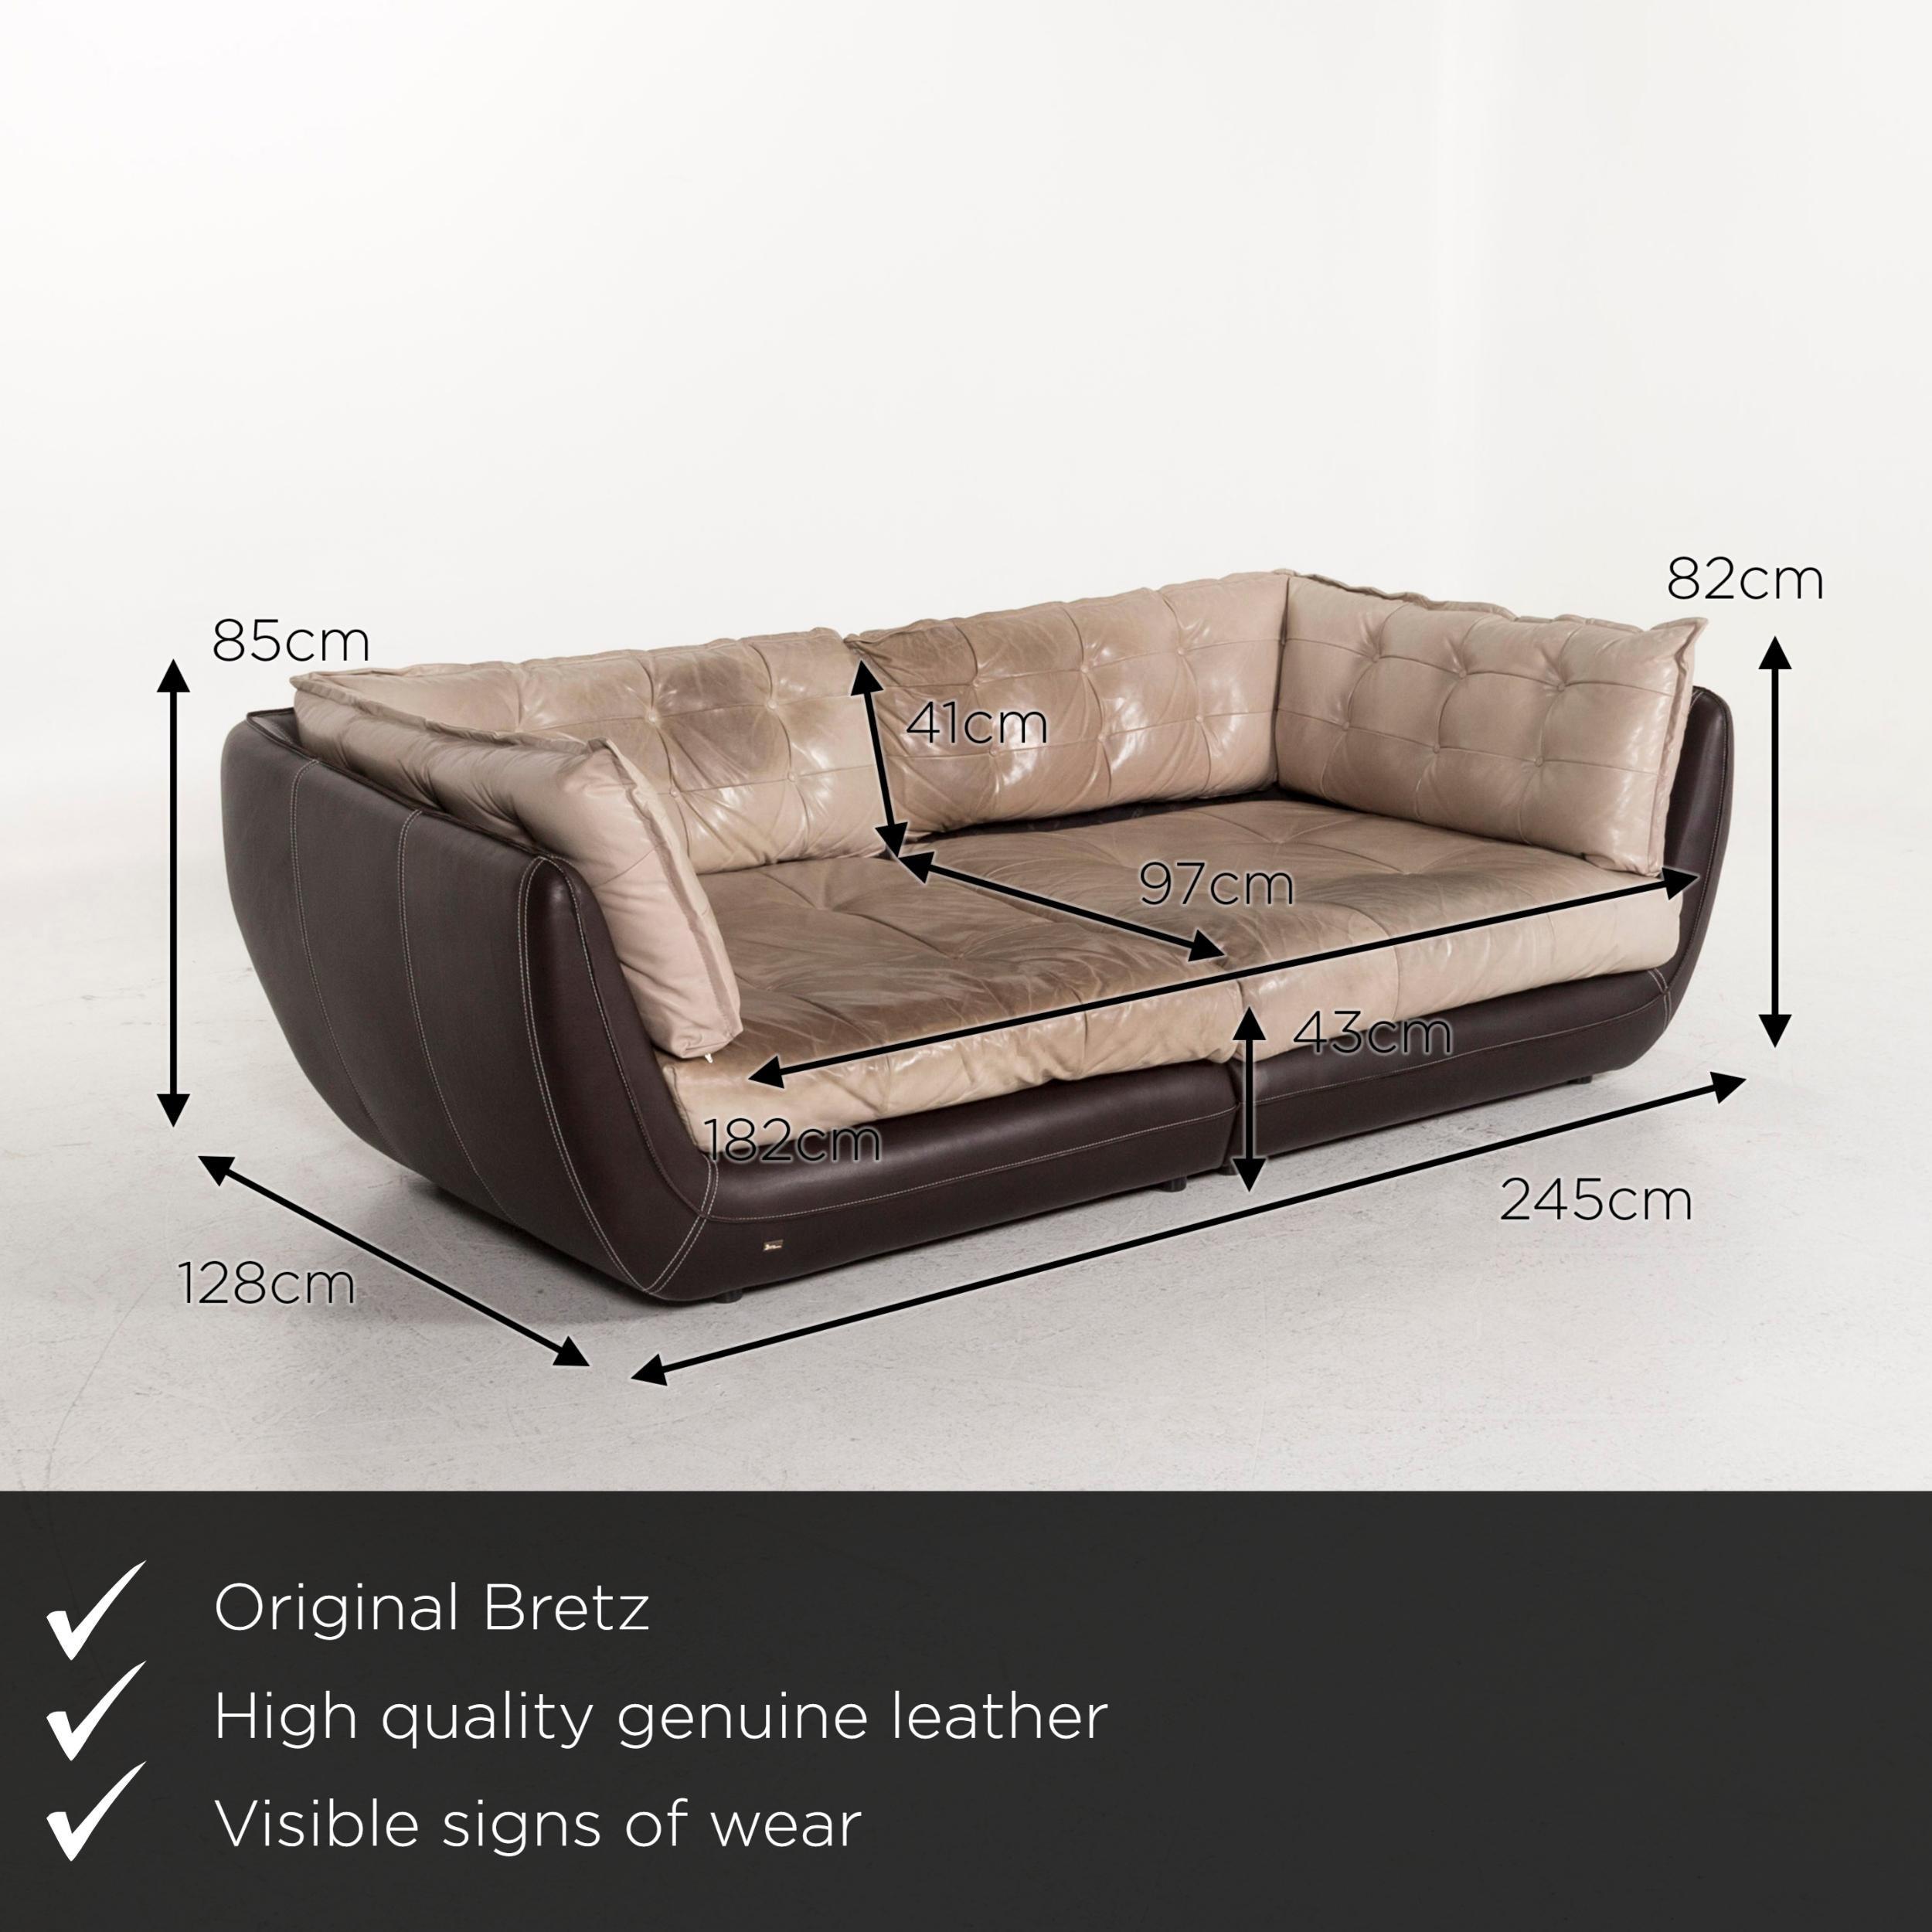 We bring to you a Bretz cupcake Jepard leather sofa brown beige four-seat couch.


 Product measurements in centimeters:
 

Depth 128
Width 245
Height 85
Seat-height 43
Rest-height 82
Seat-depth 97
Seat-width 182
Back-height 41.
 